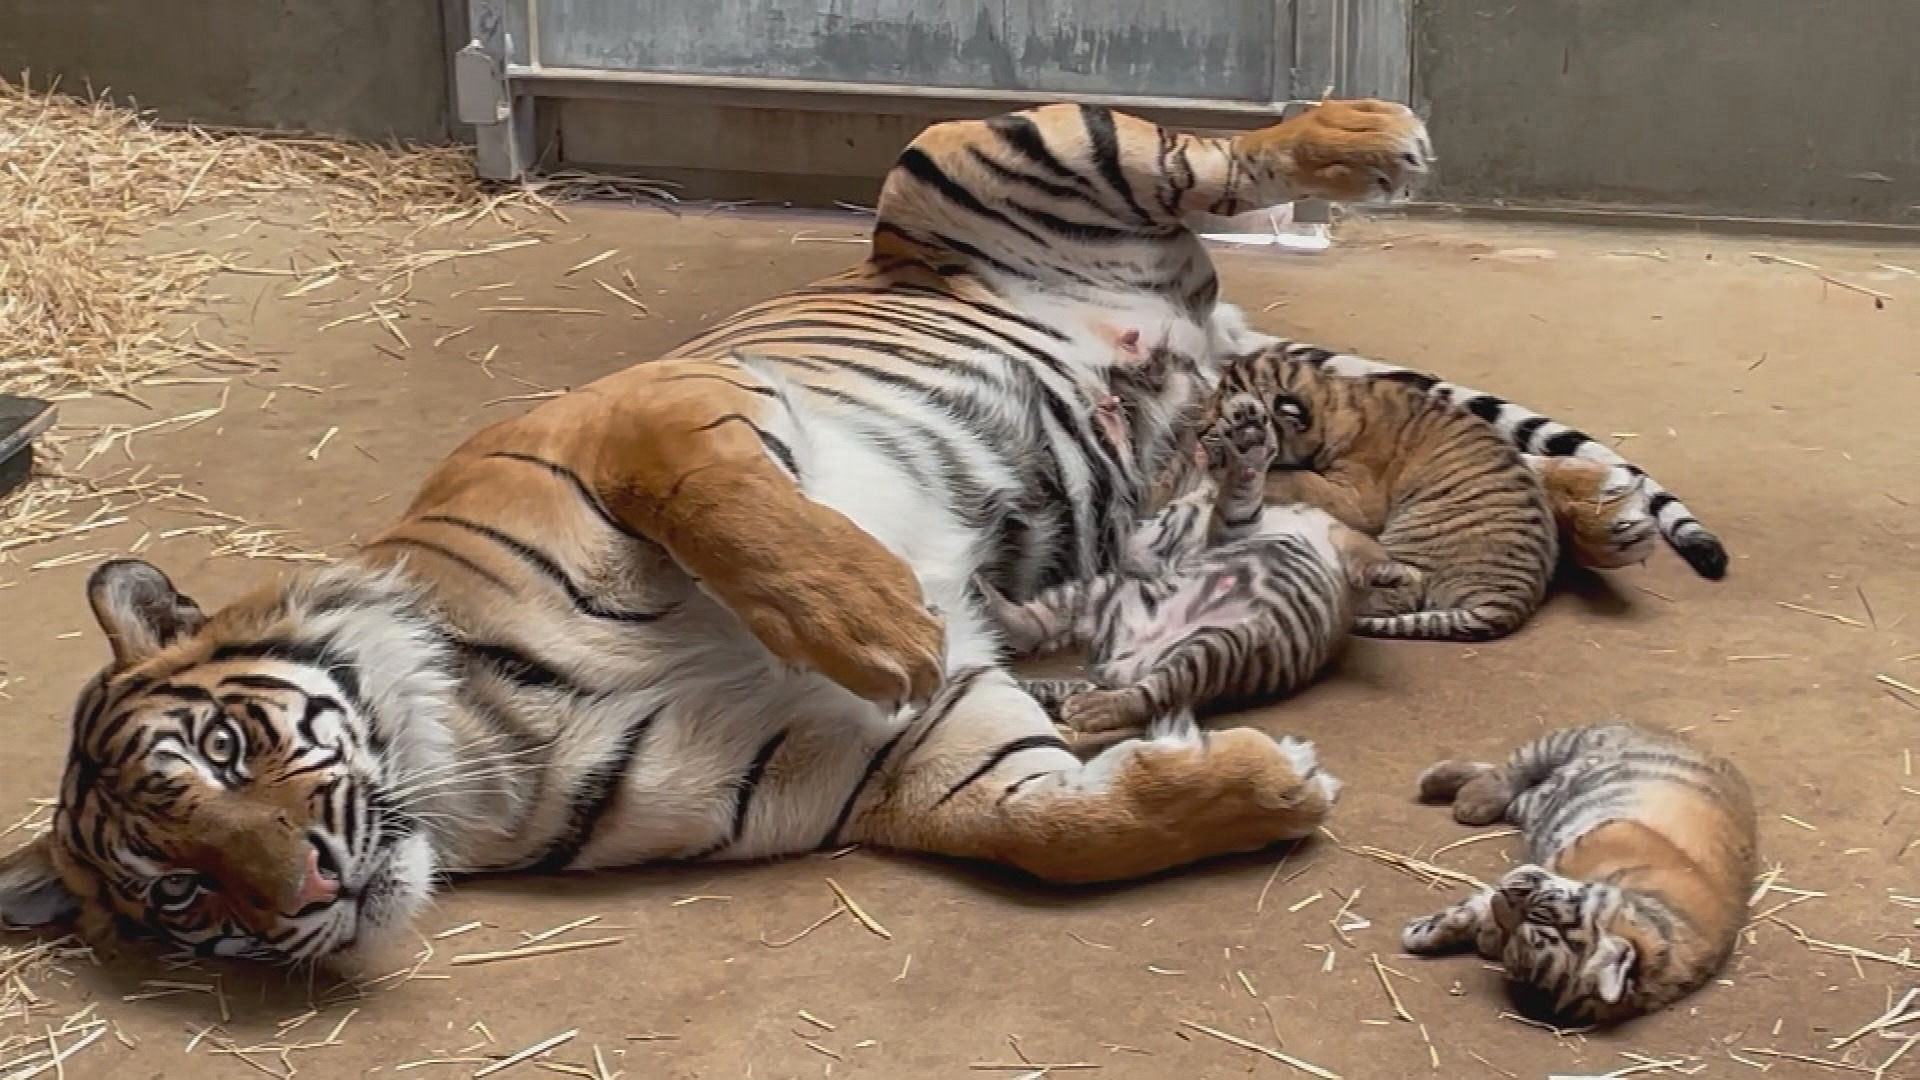 Baby zoo animals in pictures: Sumatran tiger cubs revealed by zoo